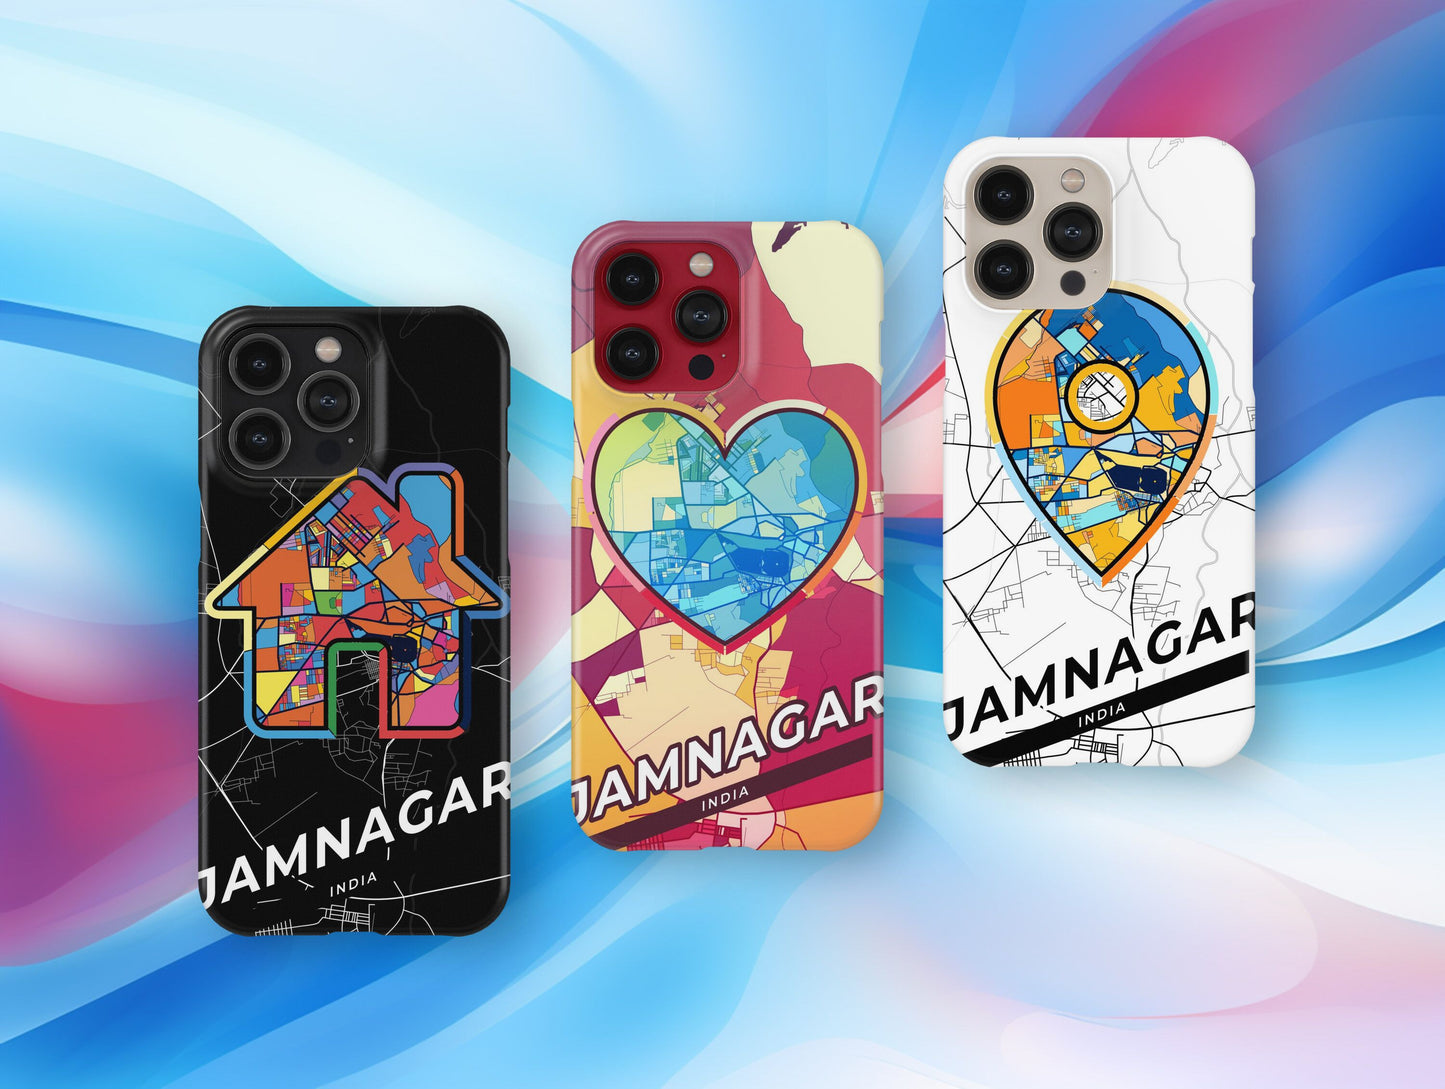 Jamnagar India slim phone case with colorful icon. Birthday, wedding or housewarming gift. Couple match cases.